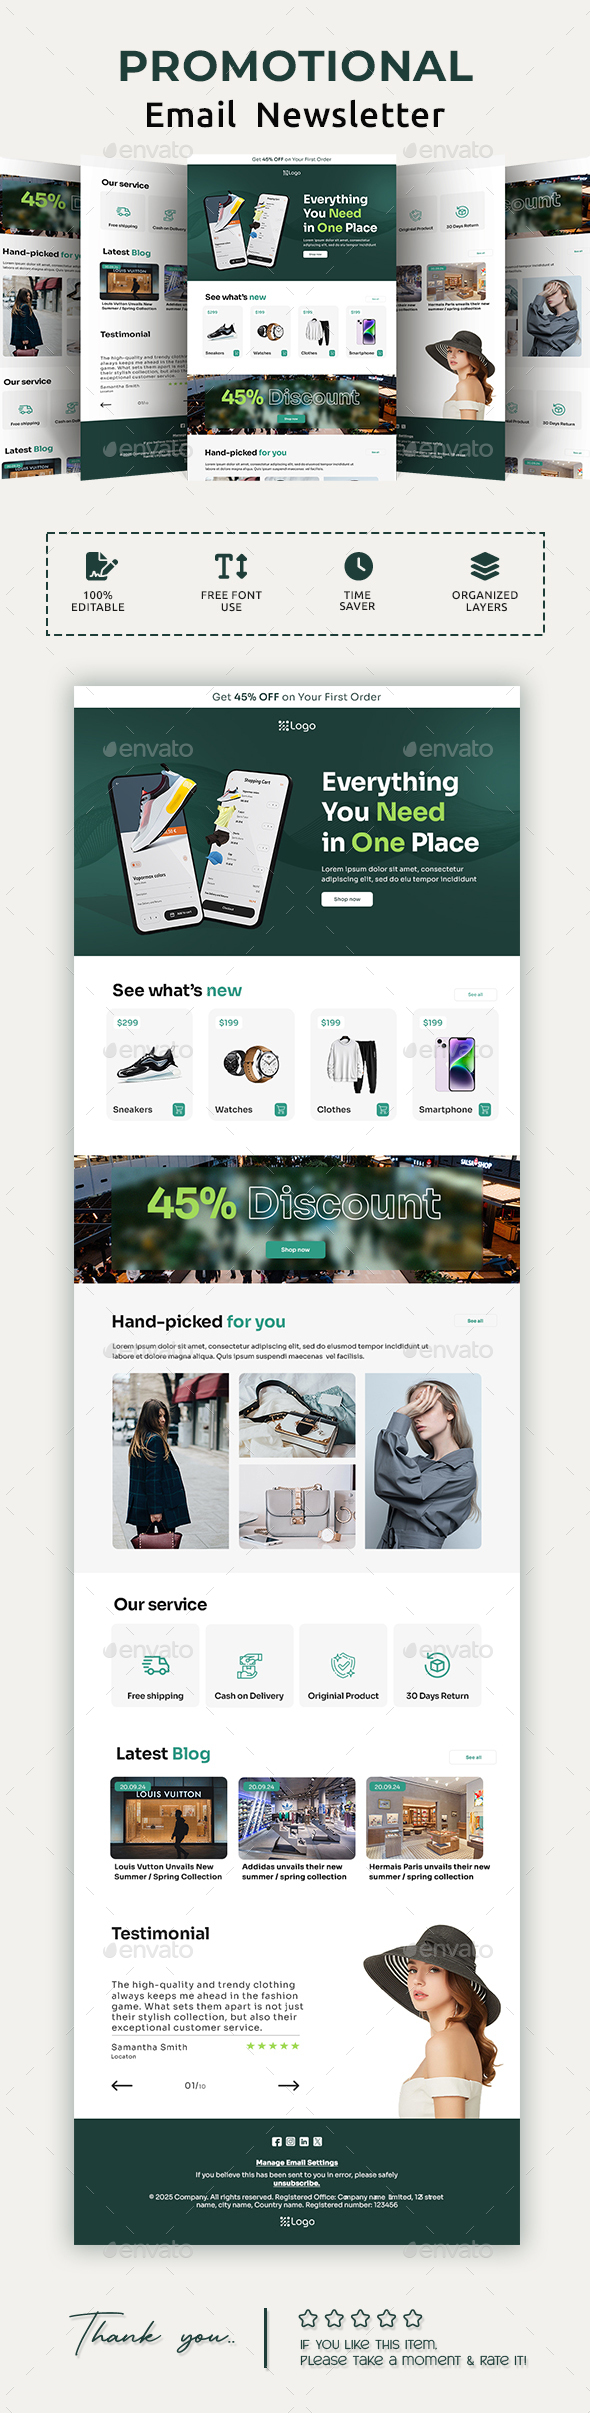 Fashion Apparel & Accessories Email Newsletter PSD Template